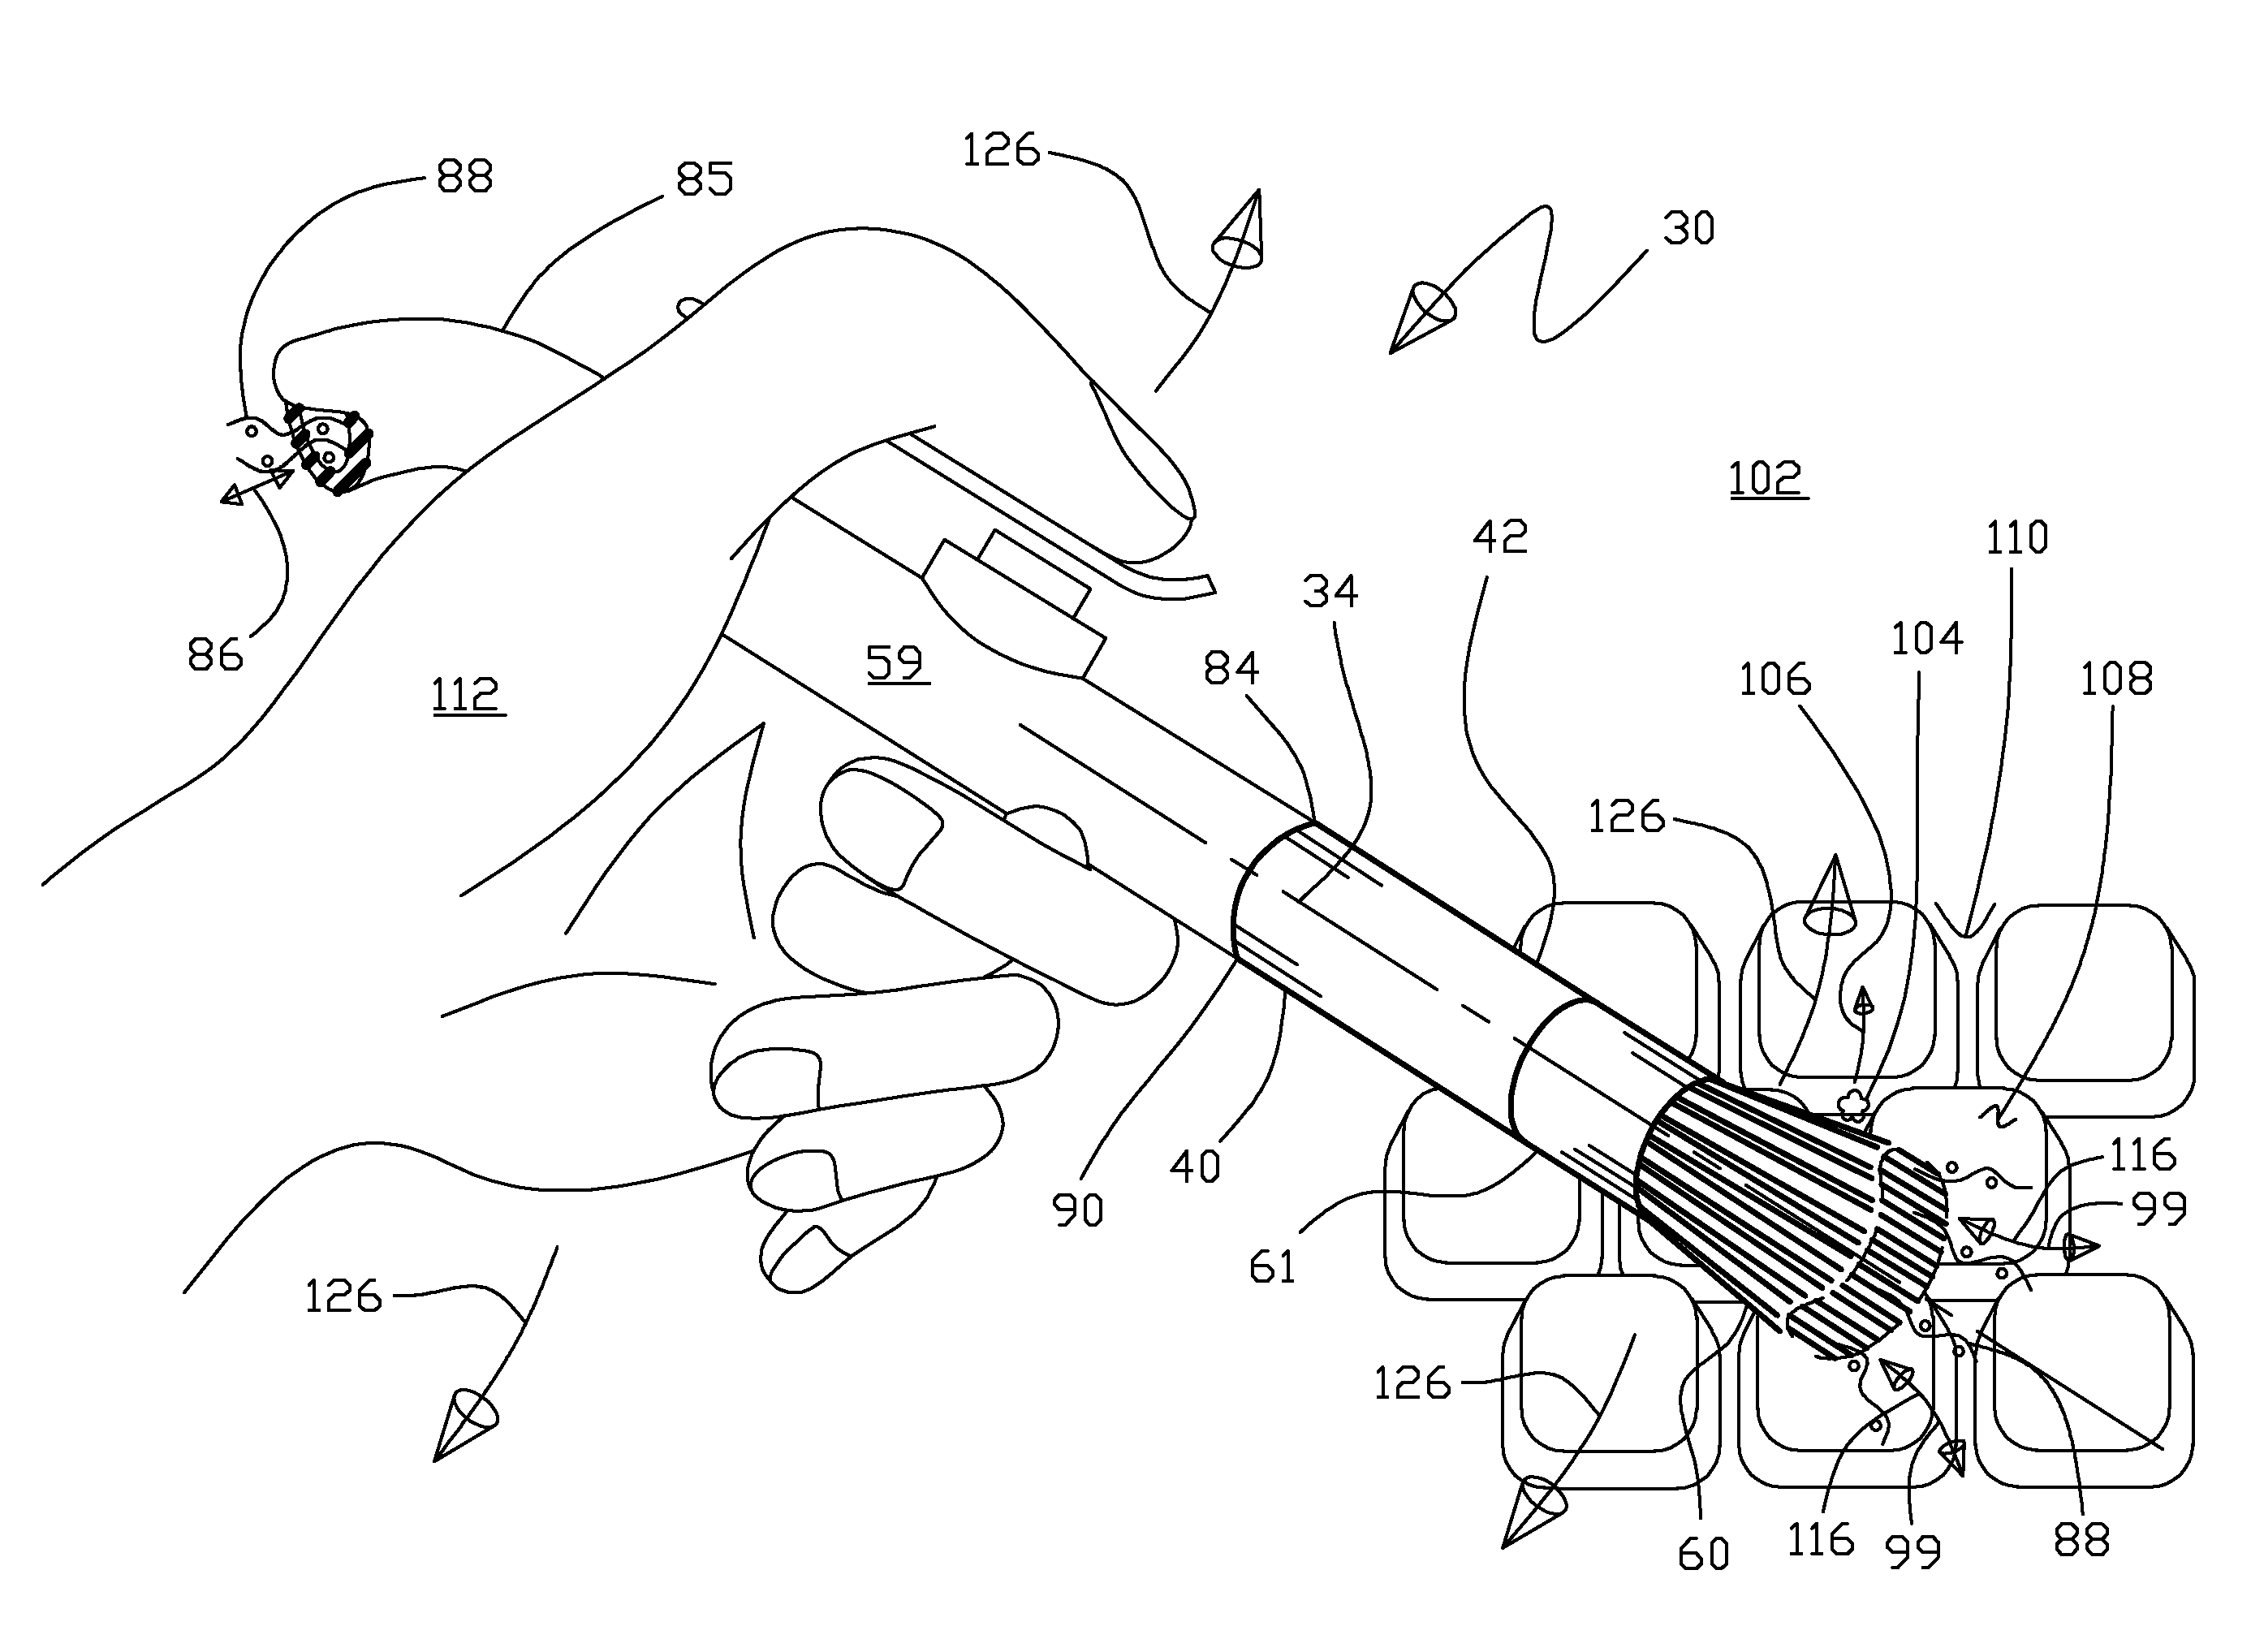 Fluid Cleaning Apparatus